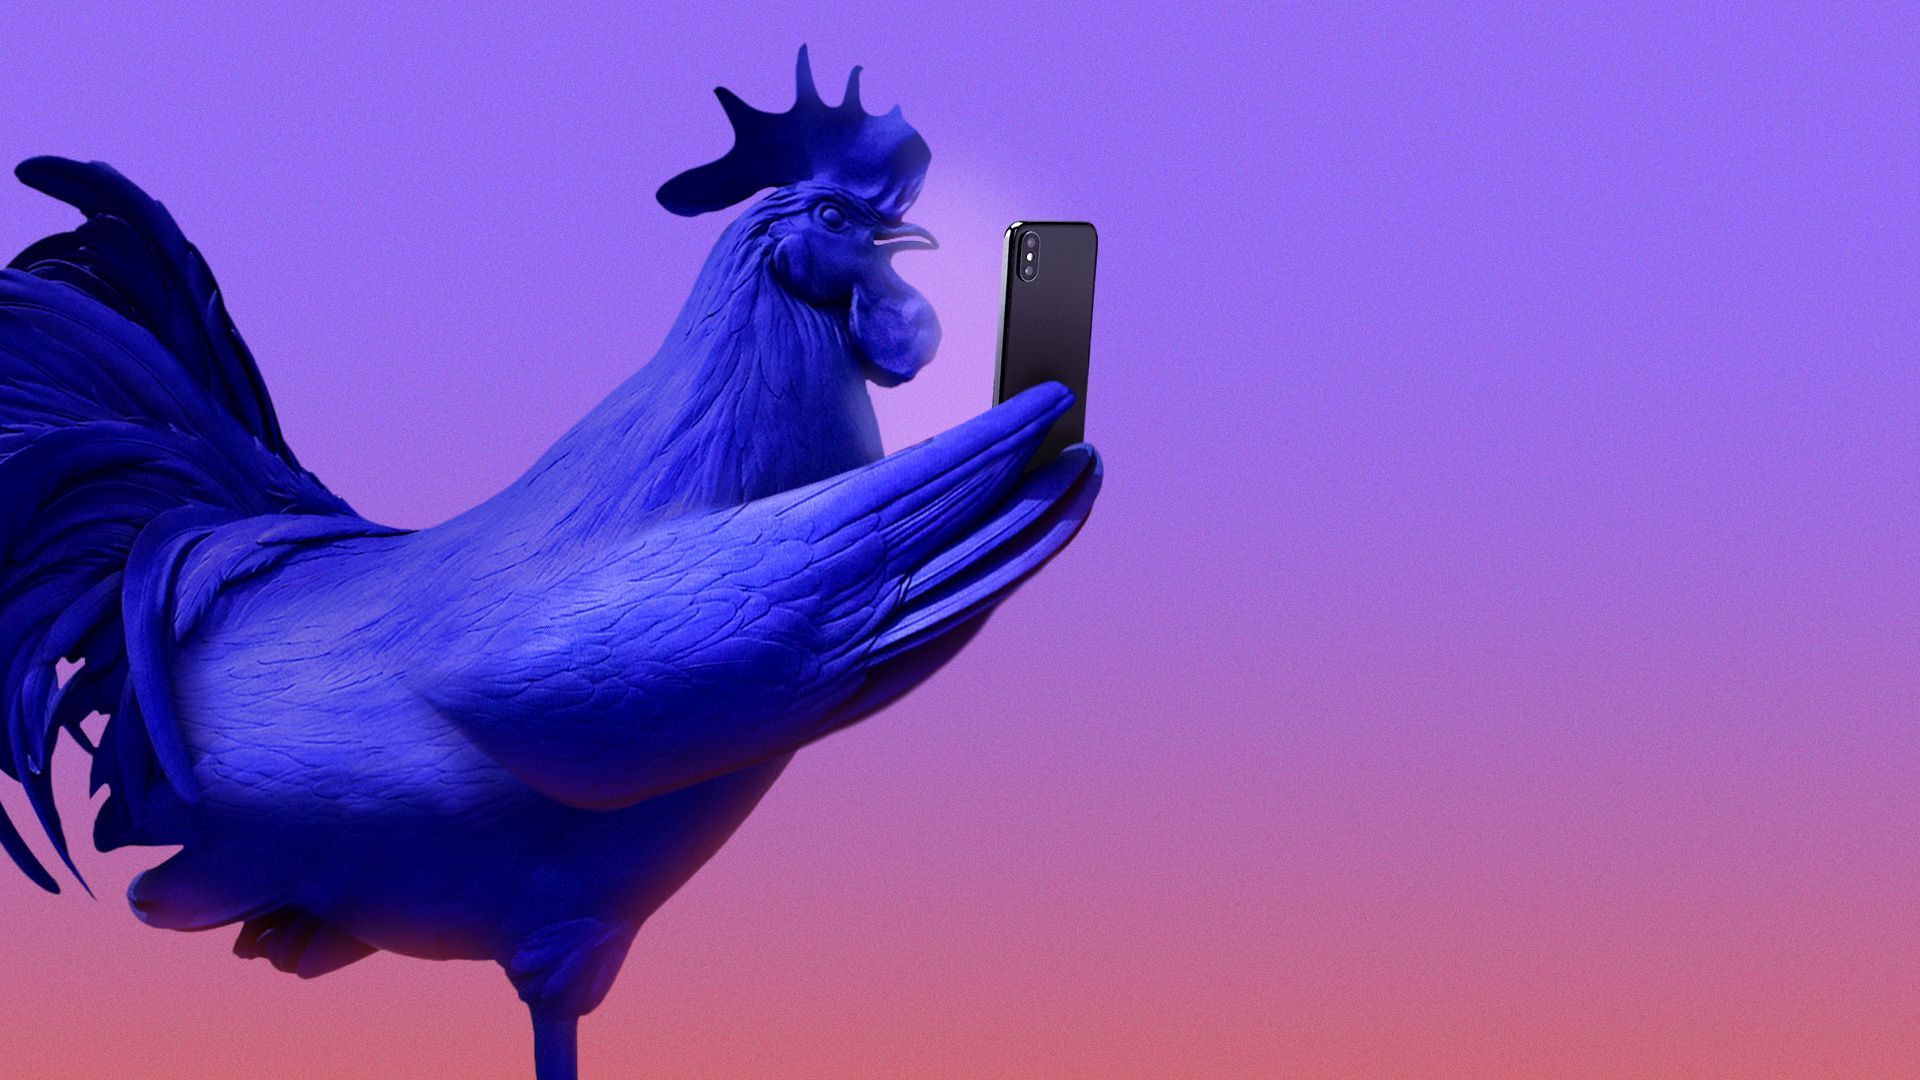 Illustration of the Hahn/Cock statue holding a cellphone. 